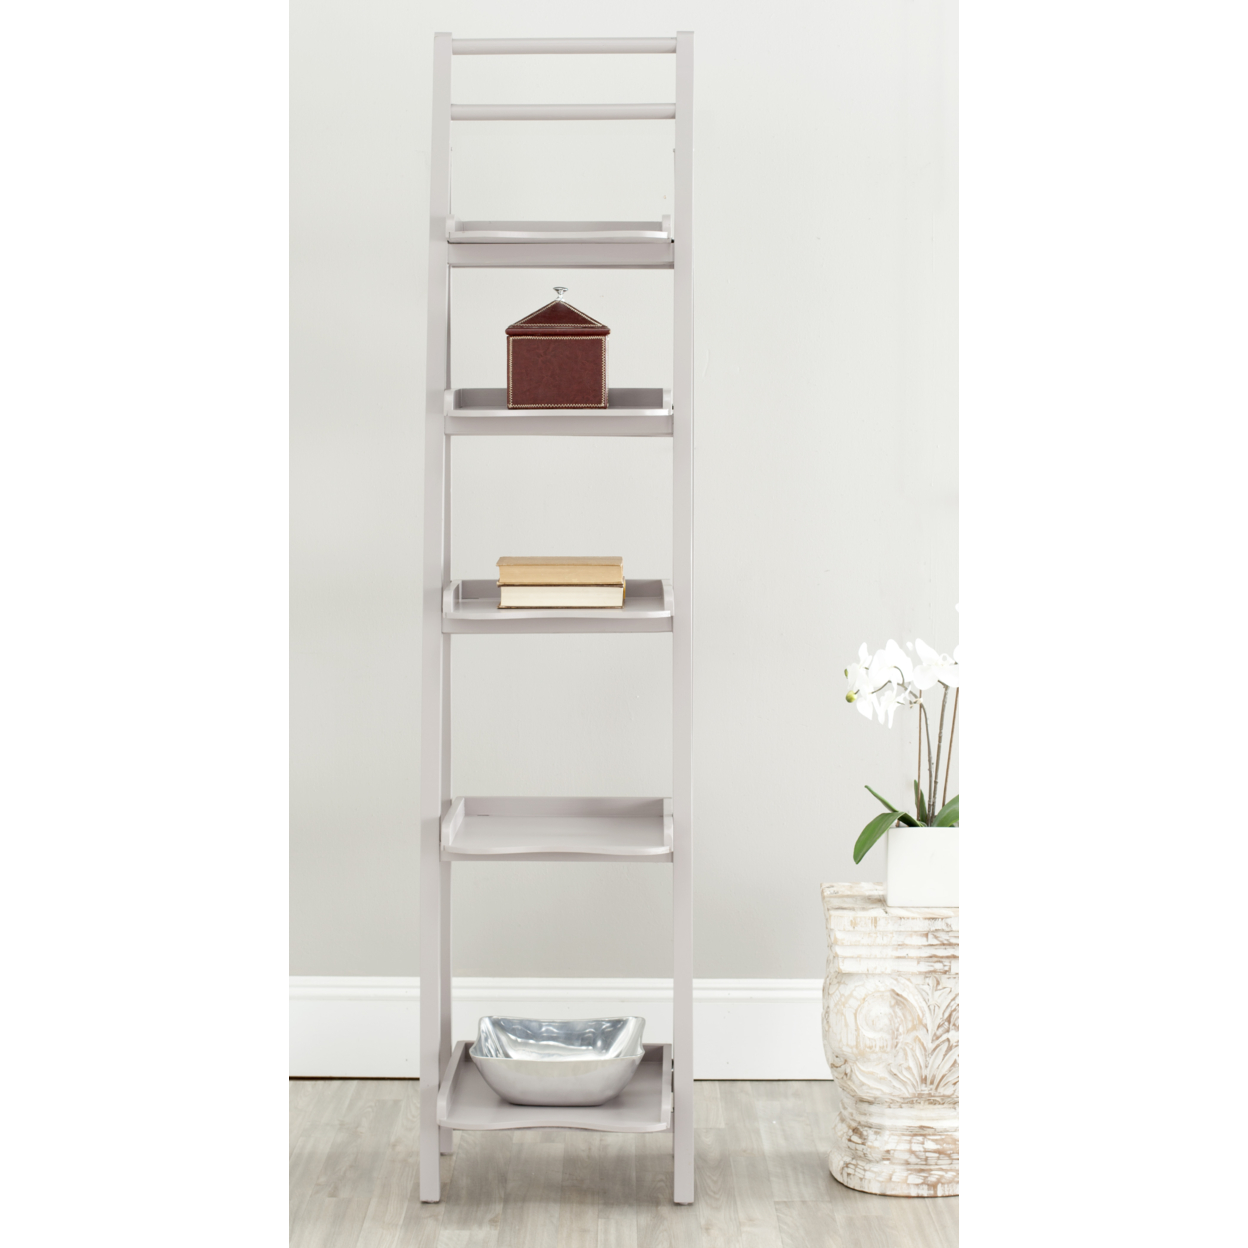 SAFAVIEH Asher Leaning 5-Tier Etagere Grey